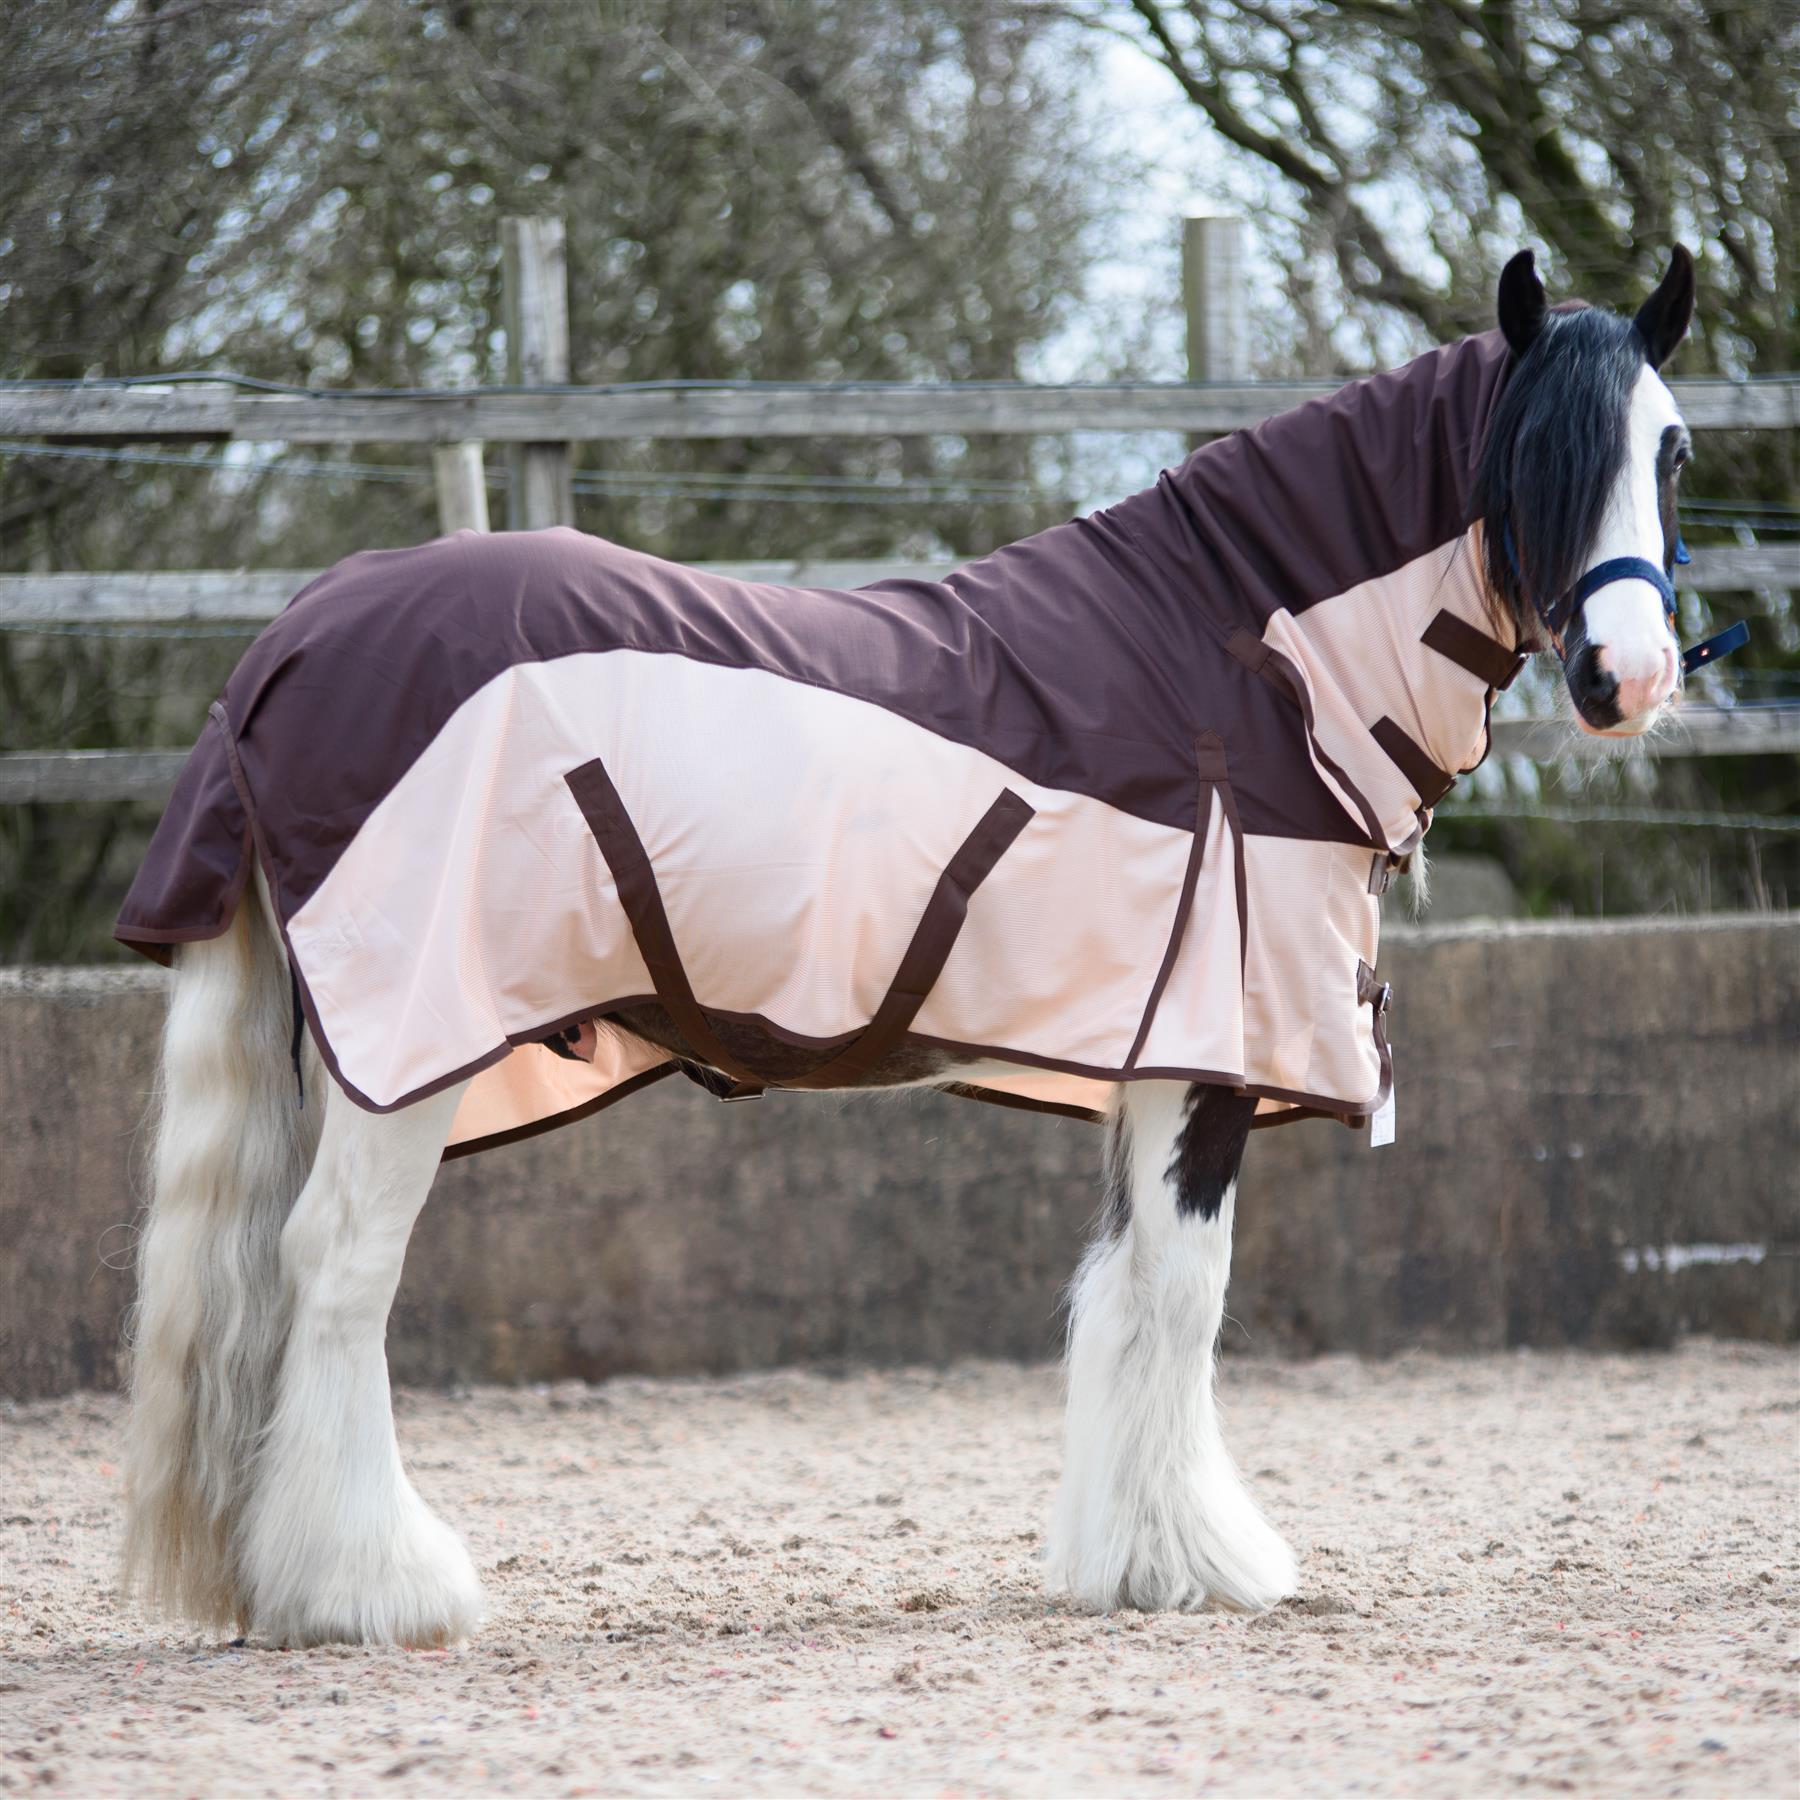 600D 2 in 1 Waterproof Fly Turnout Mesh Horse Rug Fixed Neck Brown/Caramel 5'6-6'9 - Tack24